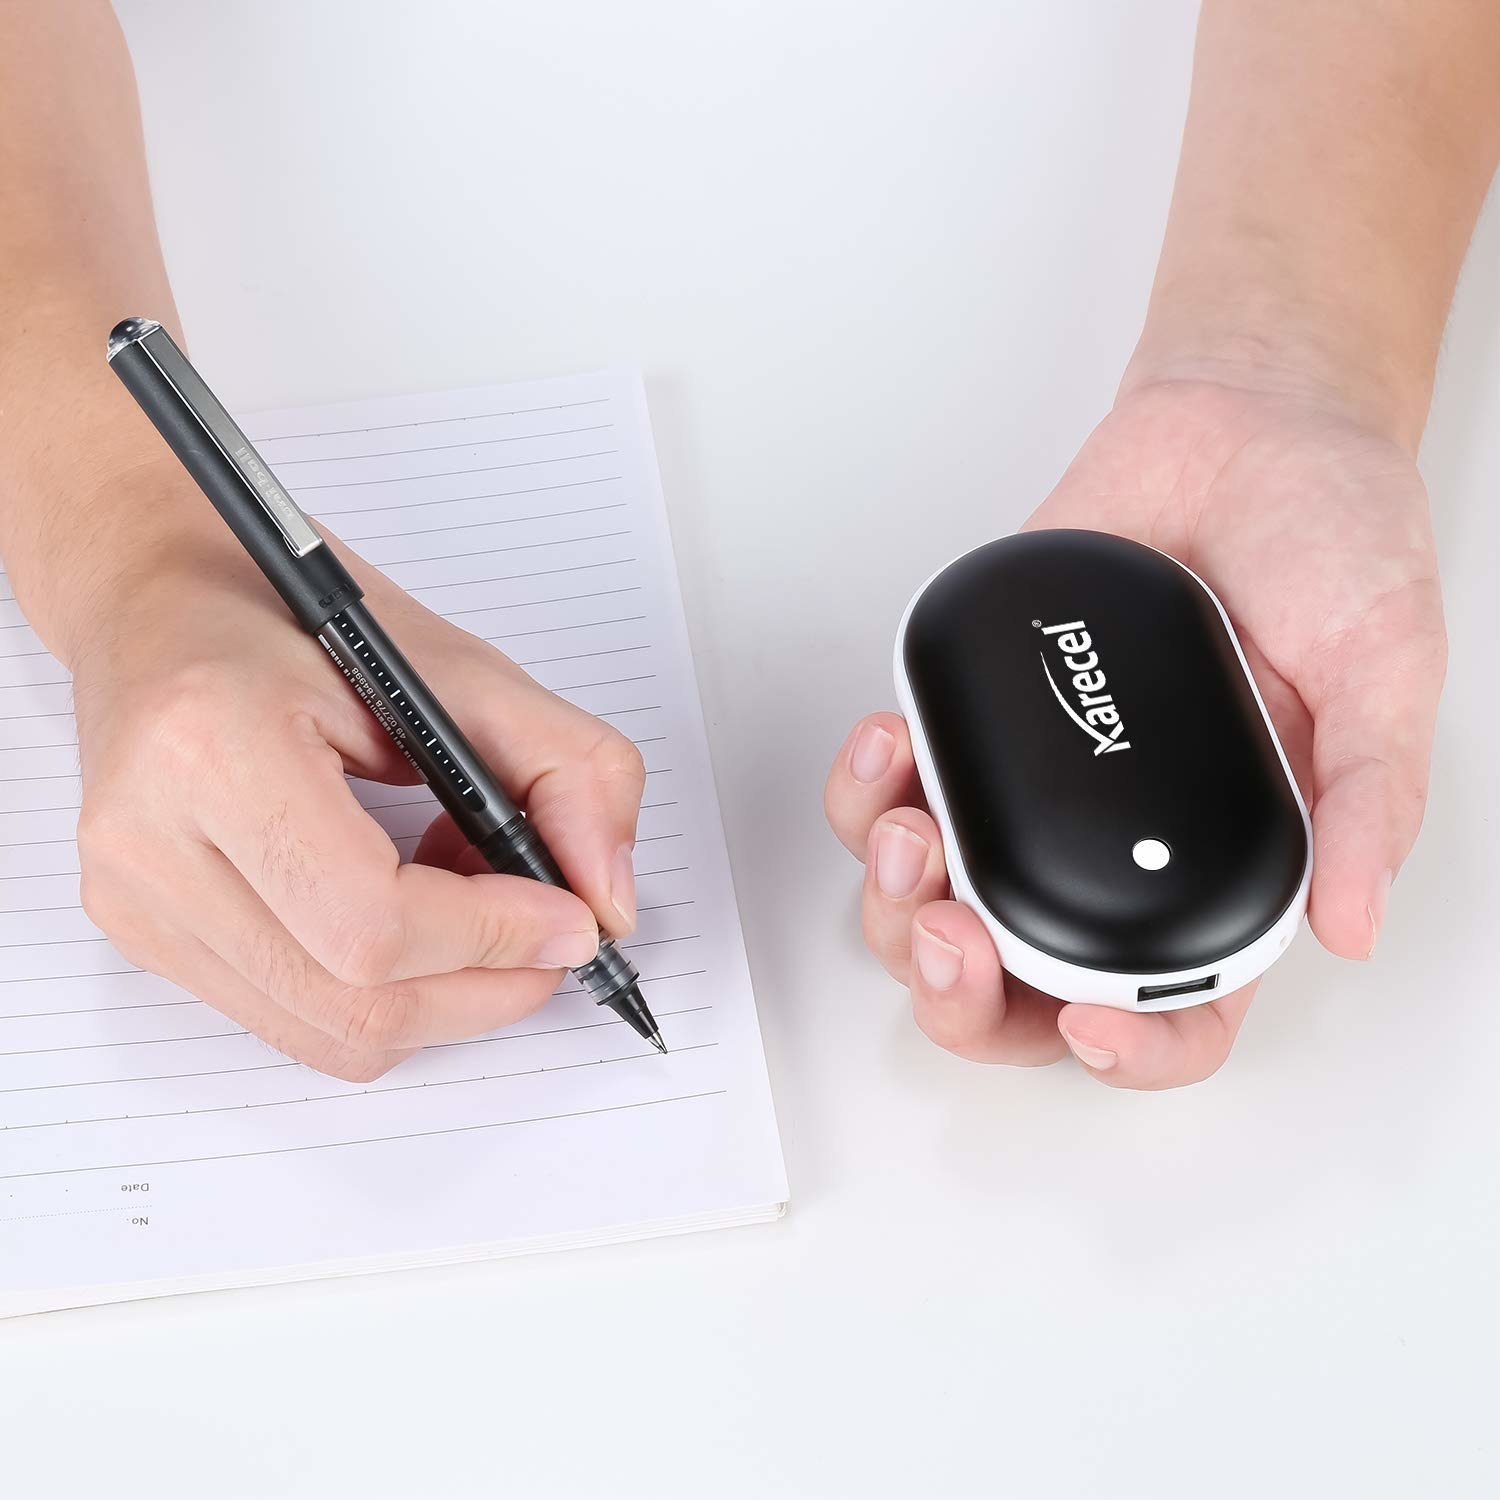 A hand holding the black, computer mouse sized and shape warmer